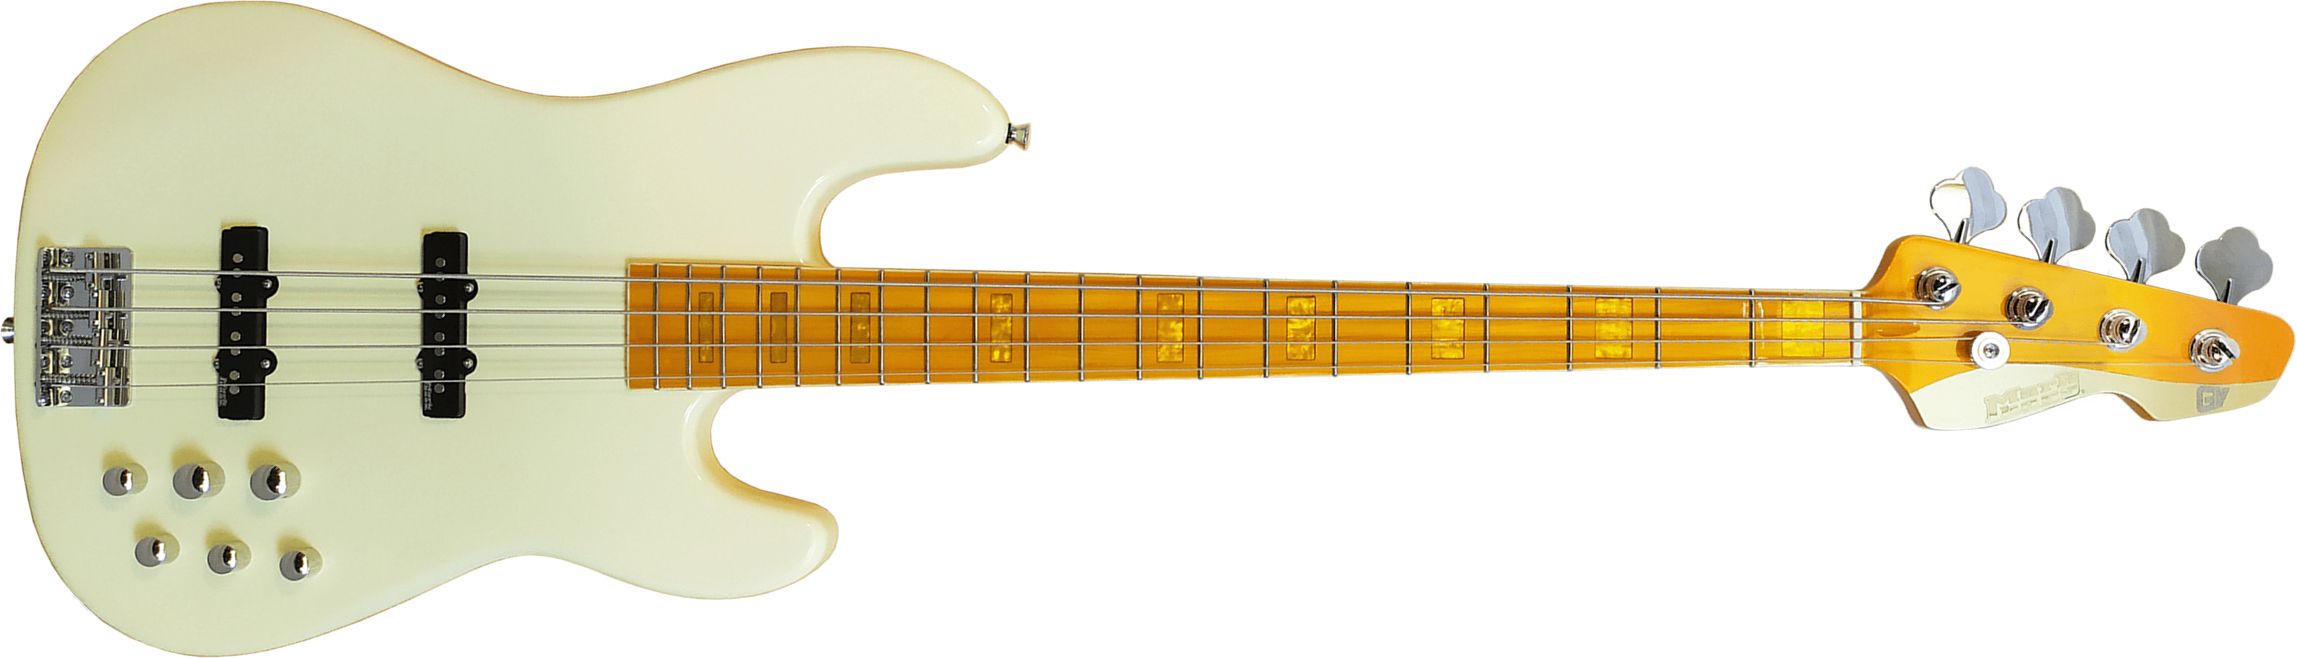 Markbass Mb Gv 4 Gloxy Val Cr Mp Active Mn - Cream - Basse Électrique Solid Body - Main picture